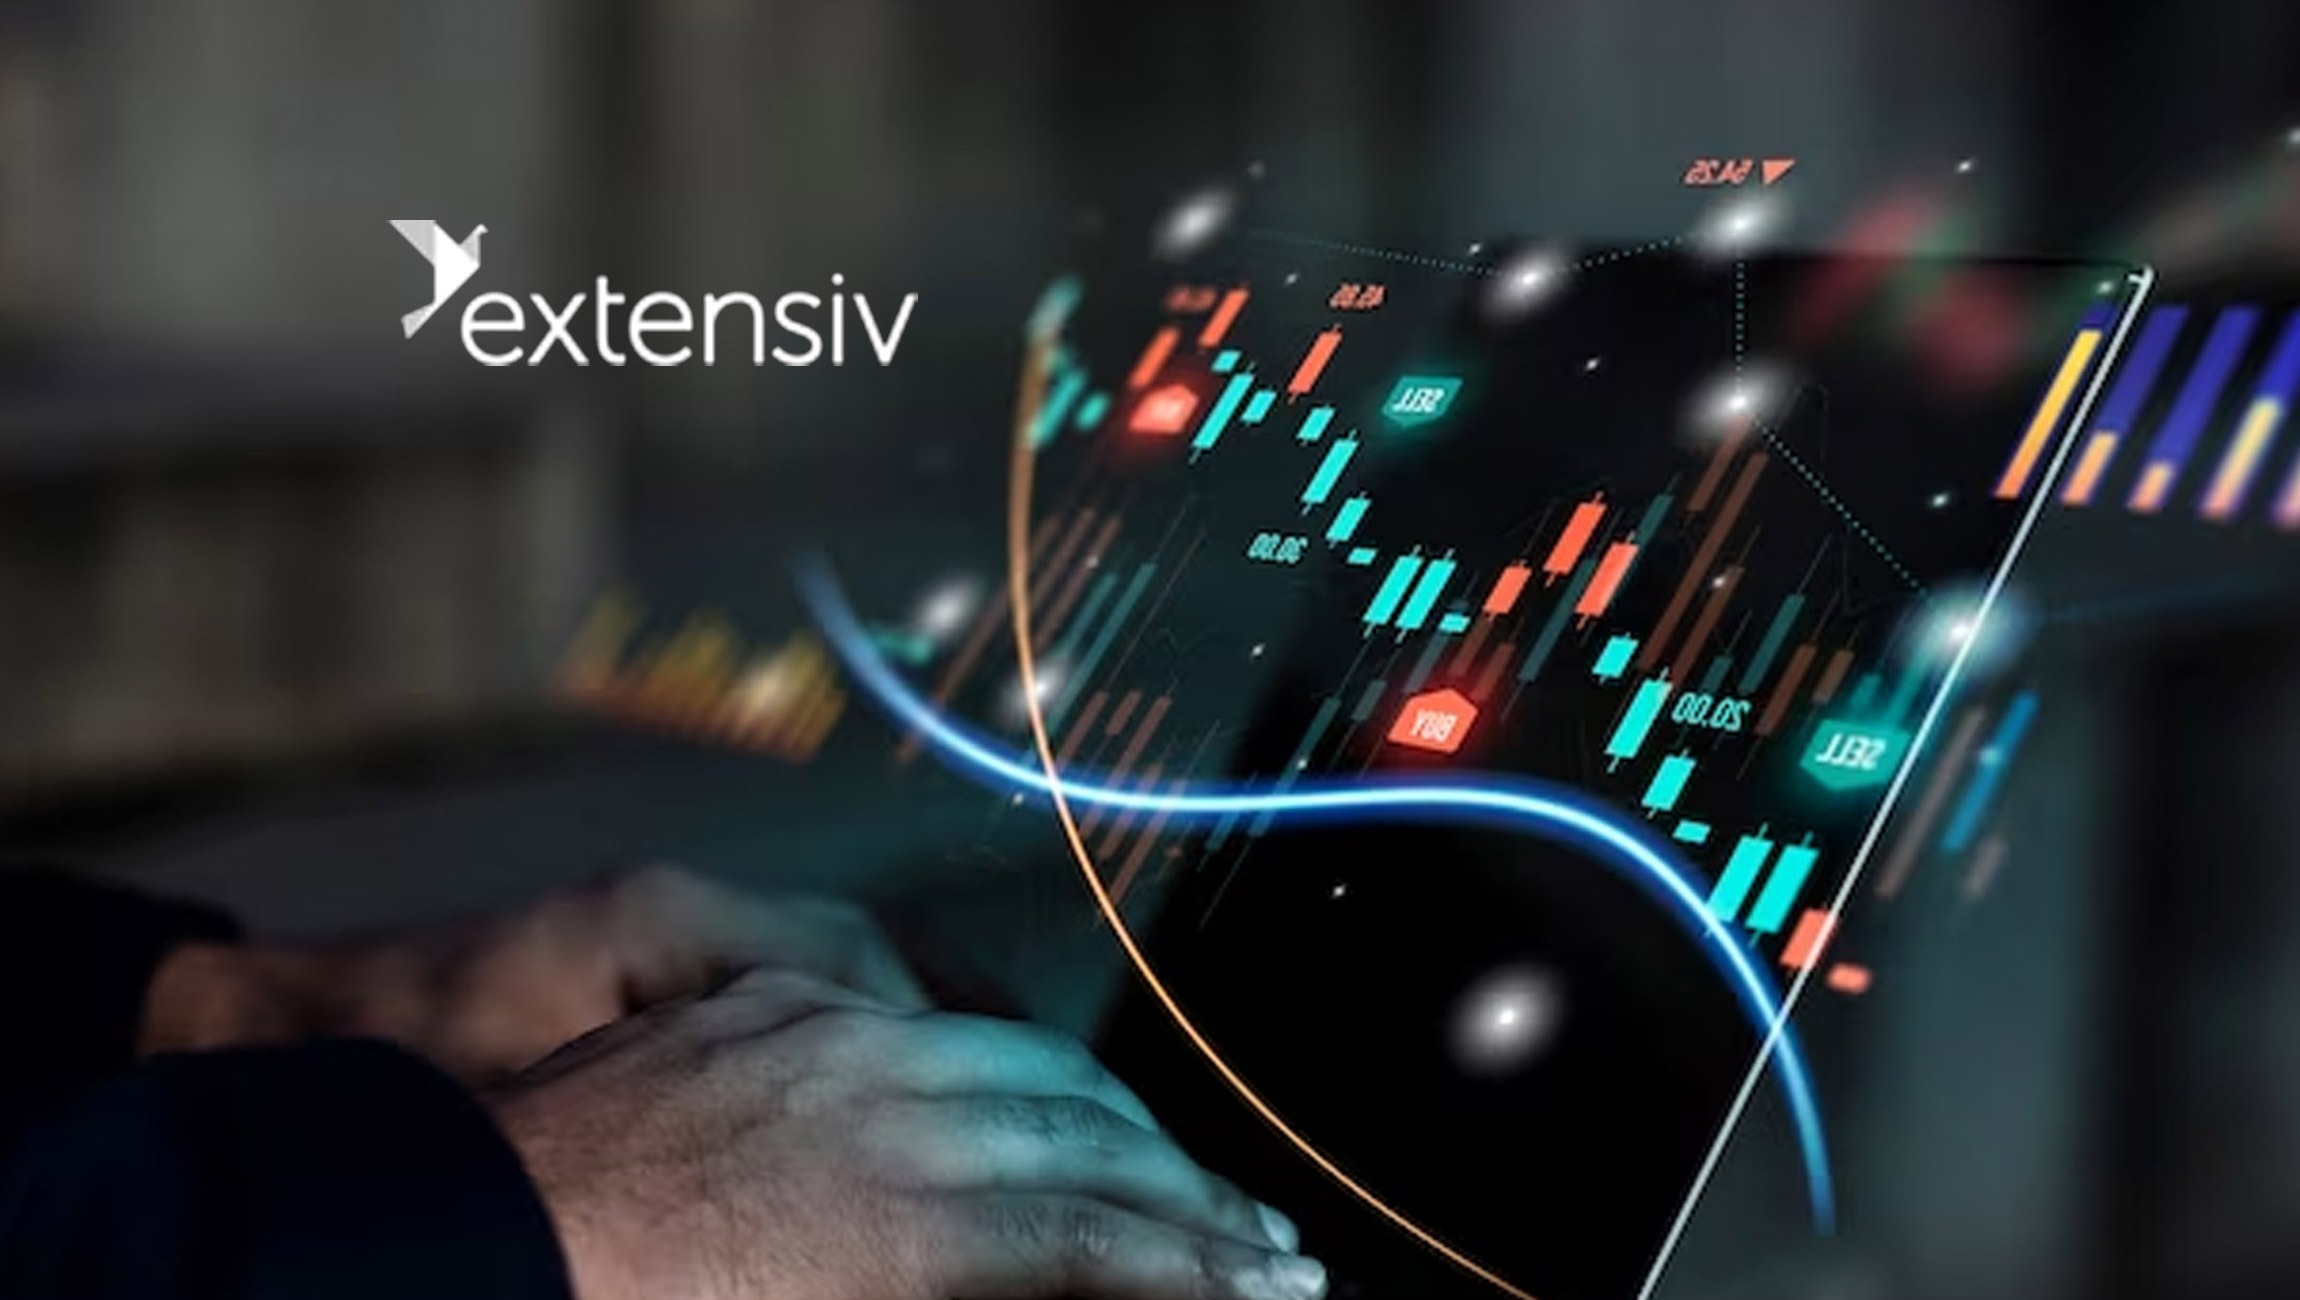 Extensiv-Launches-Advanced-Sales-Analytics-Dashboard-To-Give-Brands-Unprecedented-Visibility-into-Sales-Channel-Analysis-and-SKU-level-Velocity